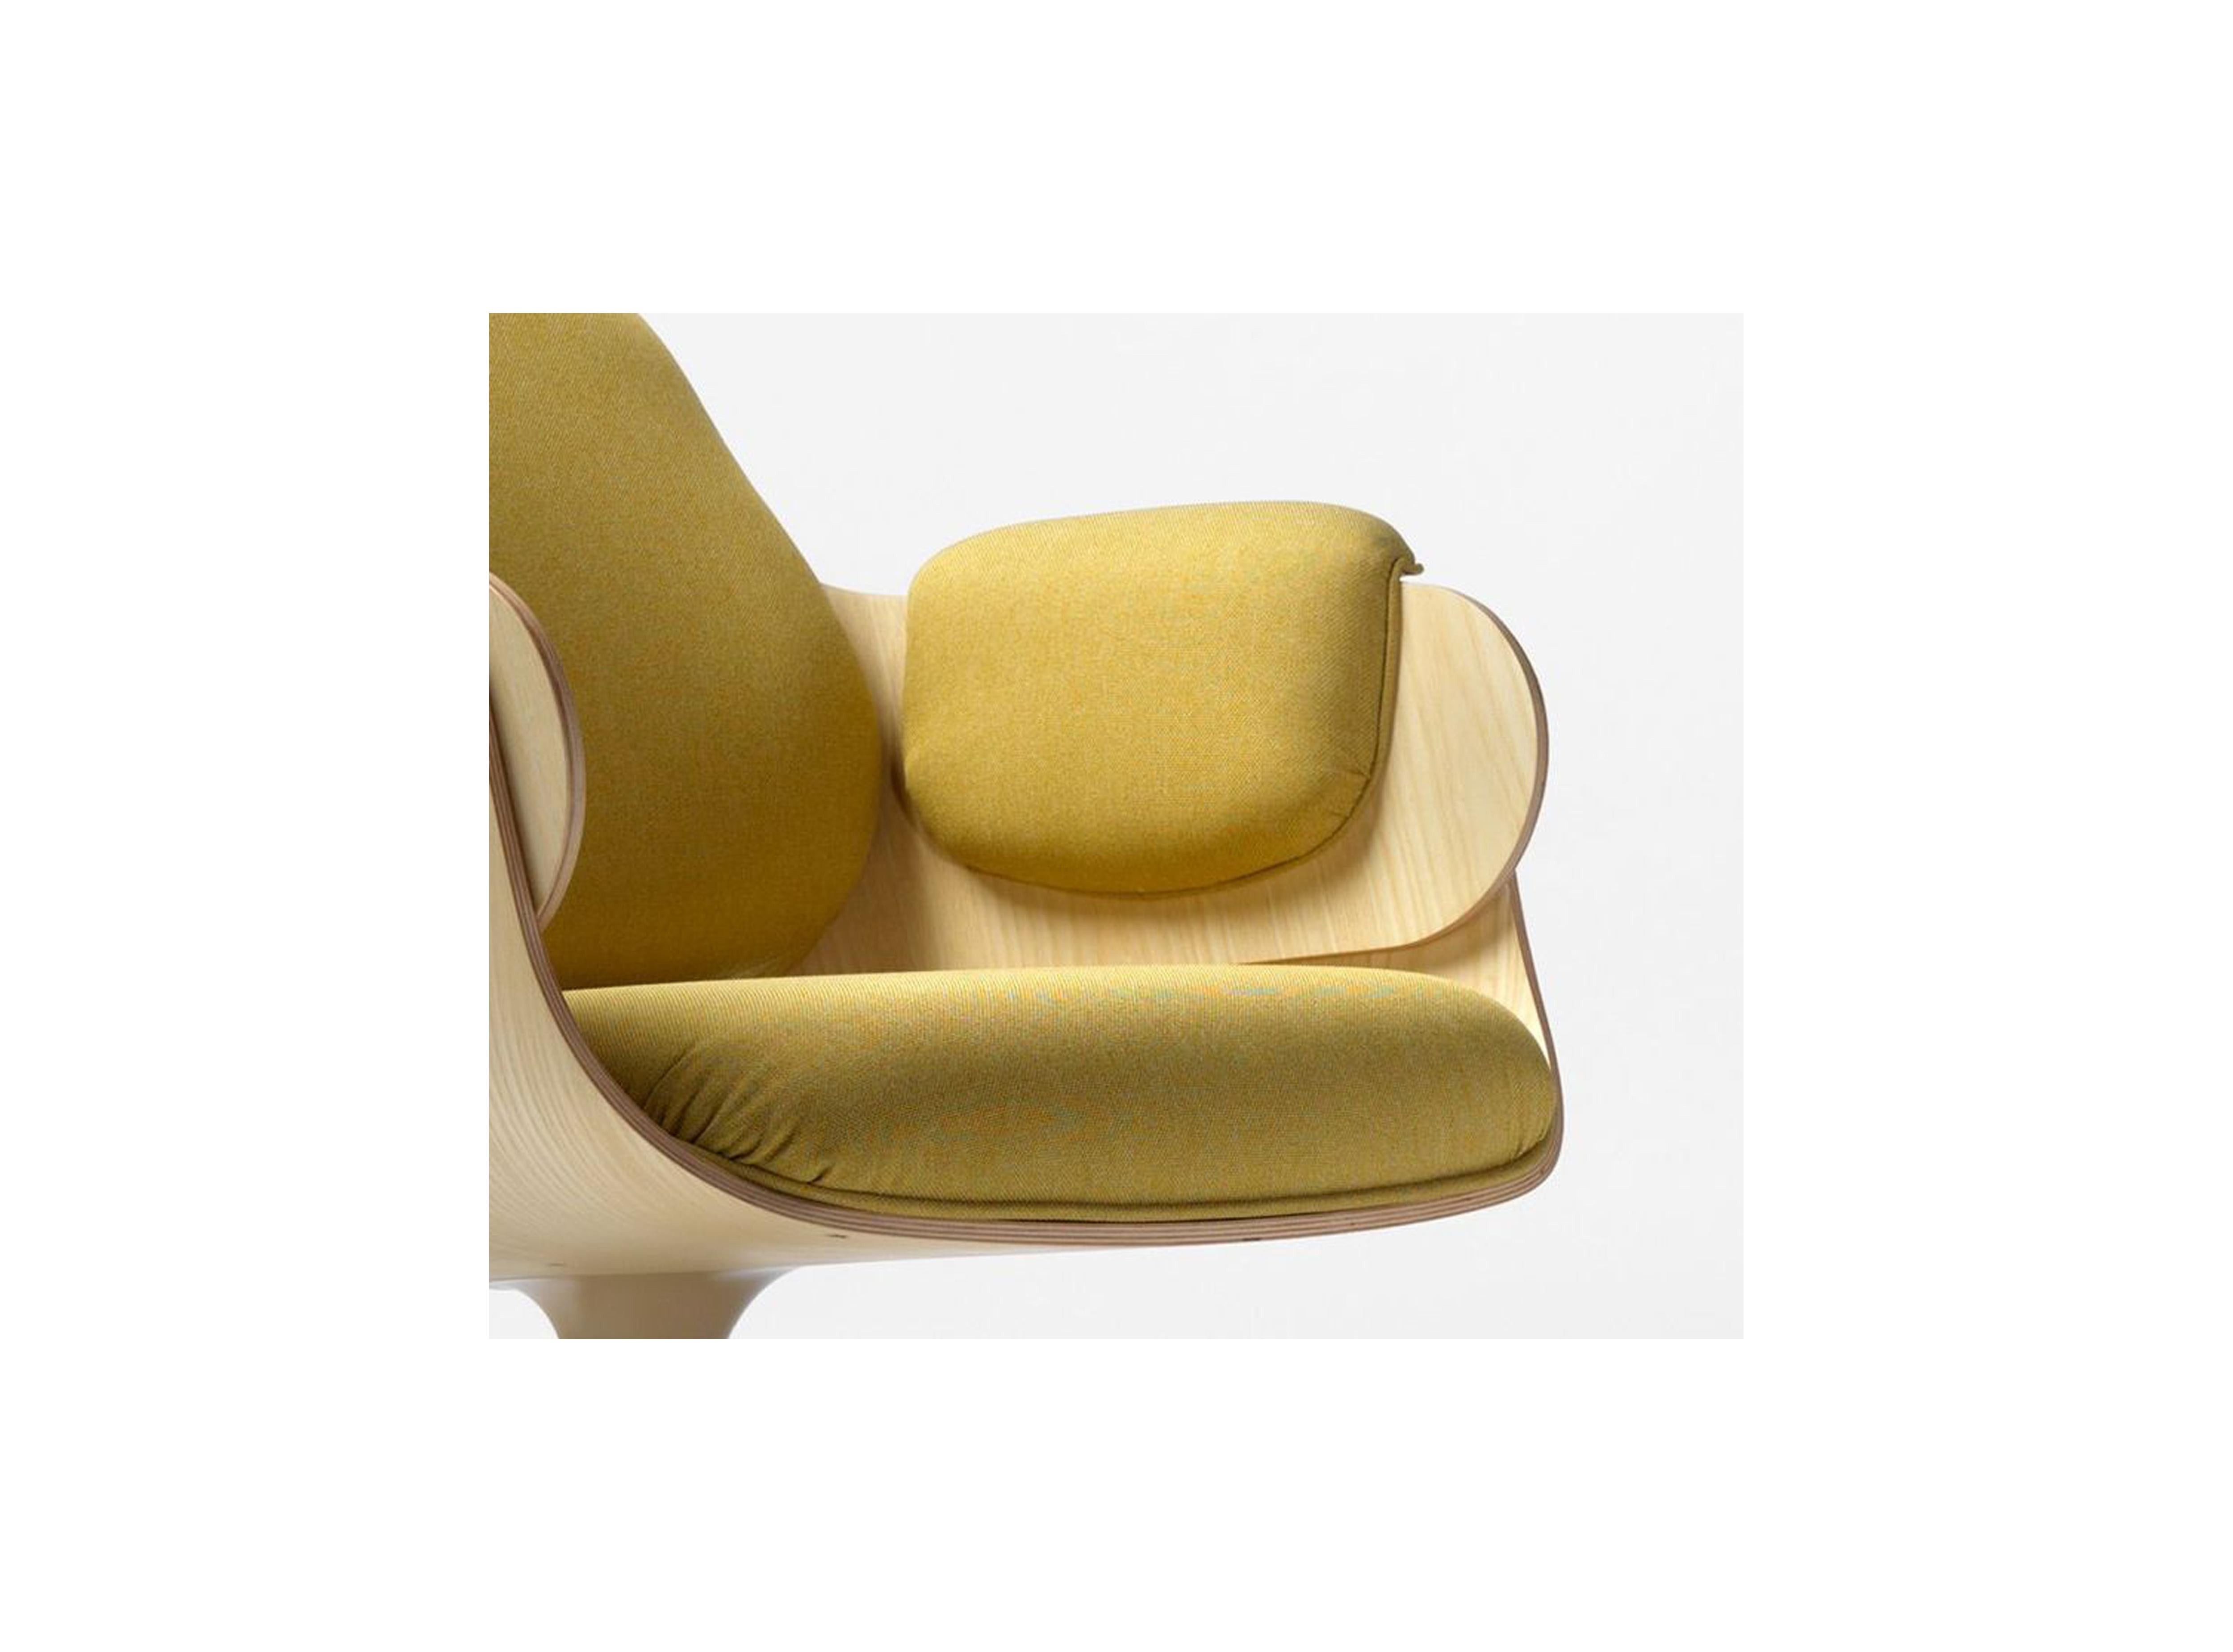 Spanish Jaime Hayon, Contemporary, Ash, Yellow Upholstery Low Lounger Armchair For Sale